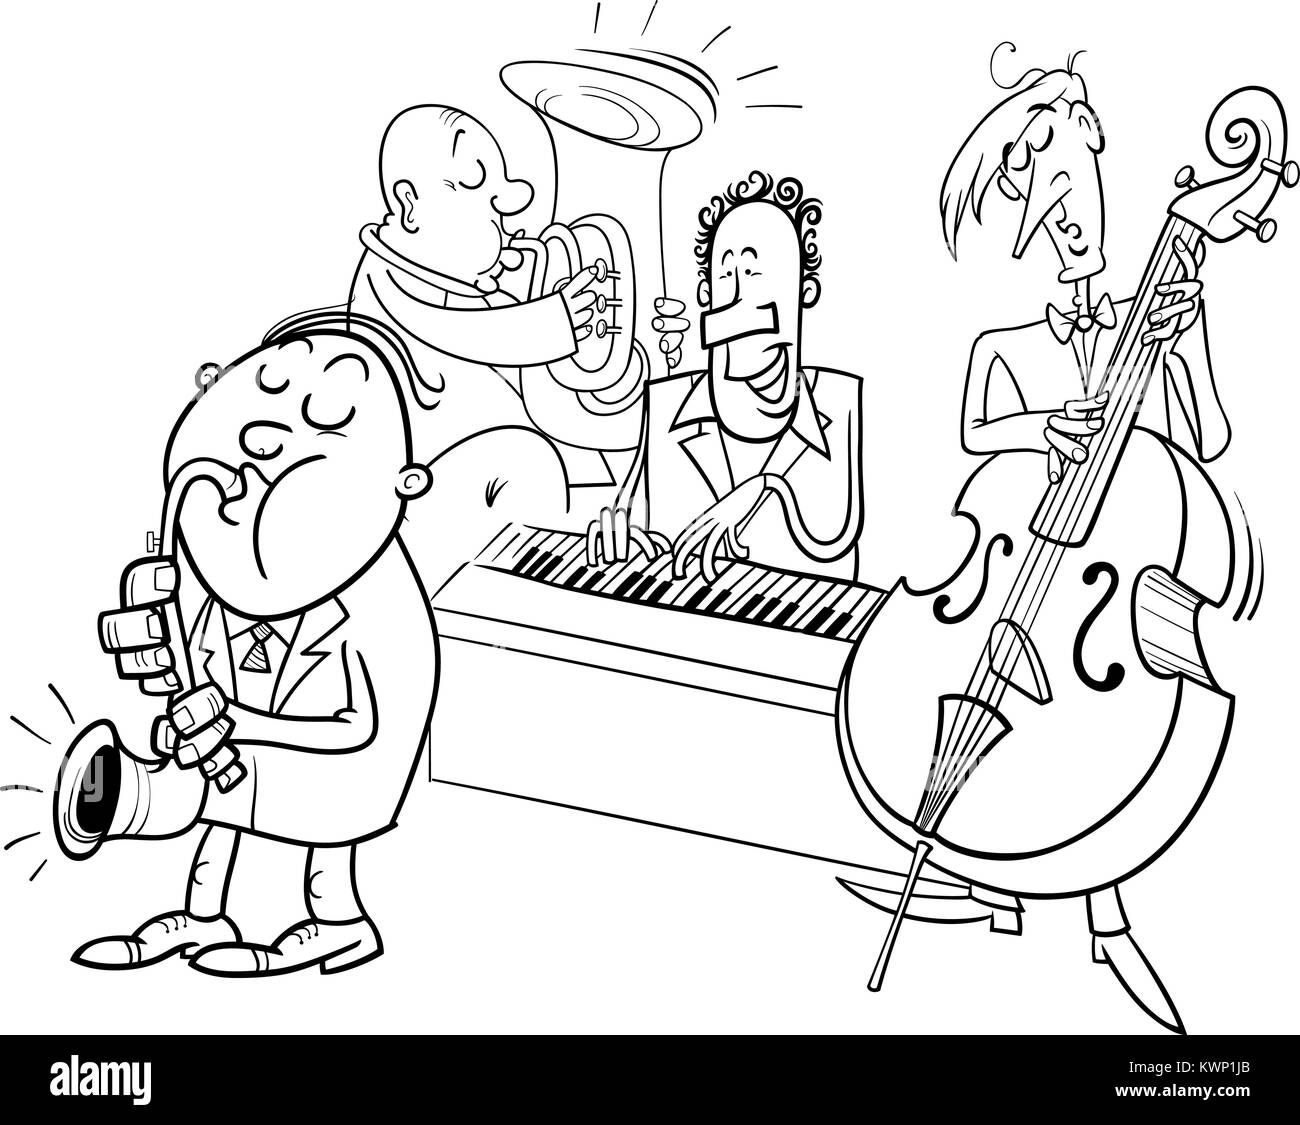 Black and White Cartoon Illustration of Jazz Musicians Band Playing a Concert Coloring  Book Stock Vector